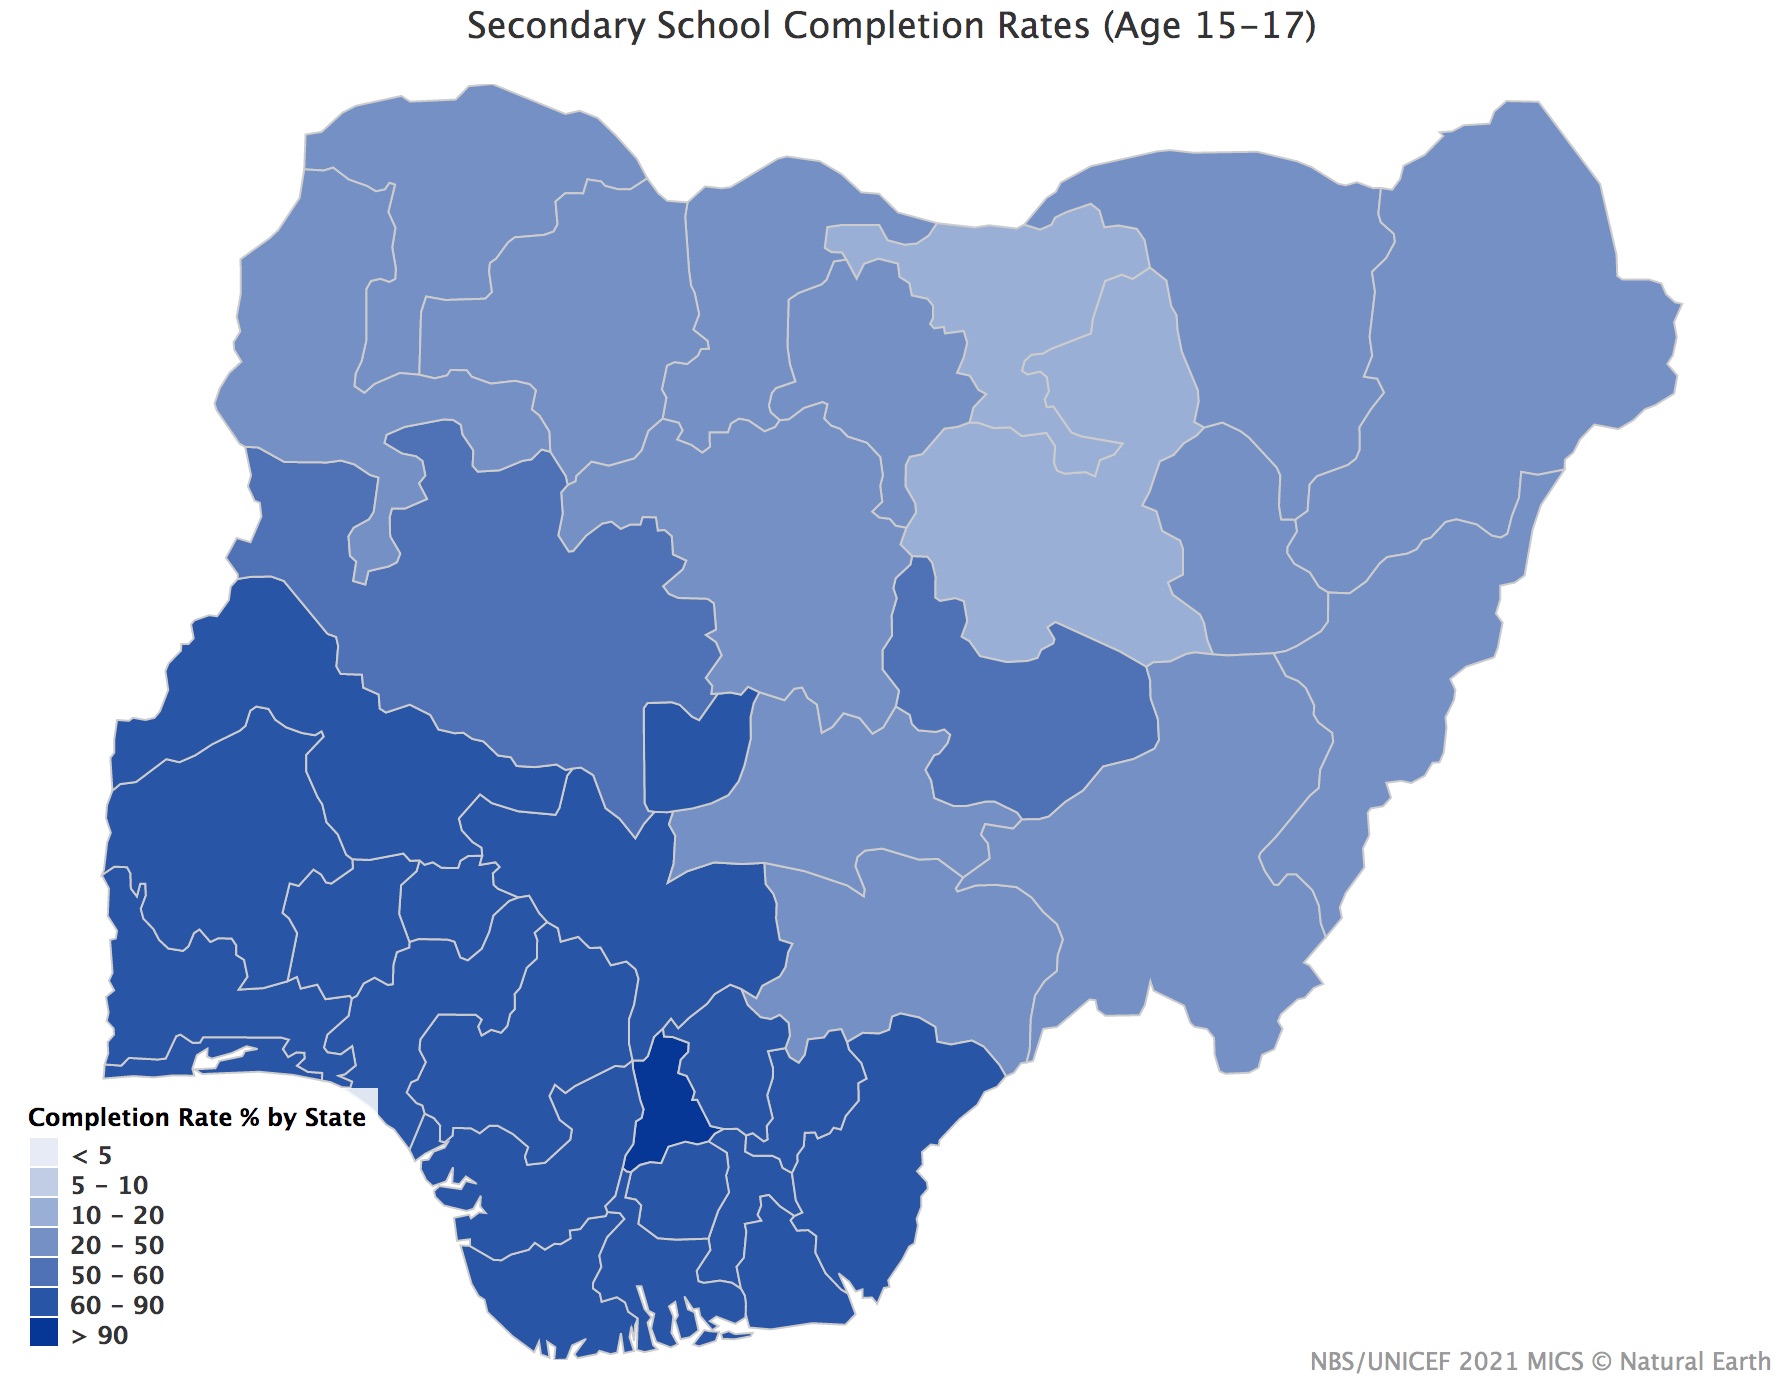 Secondary School Completion Rates